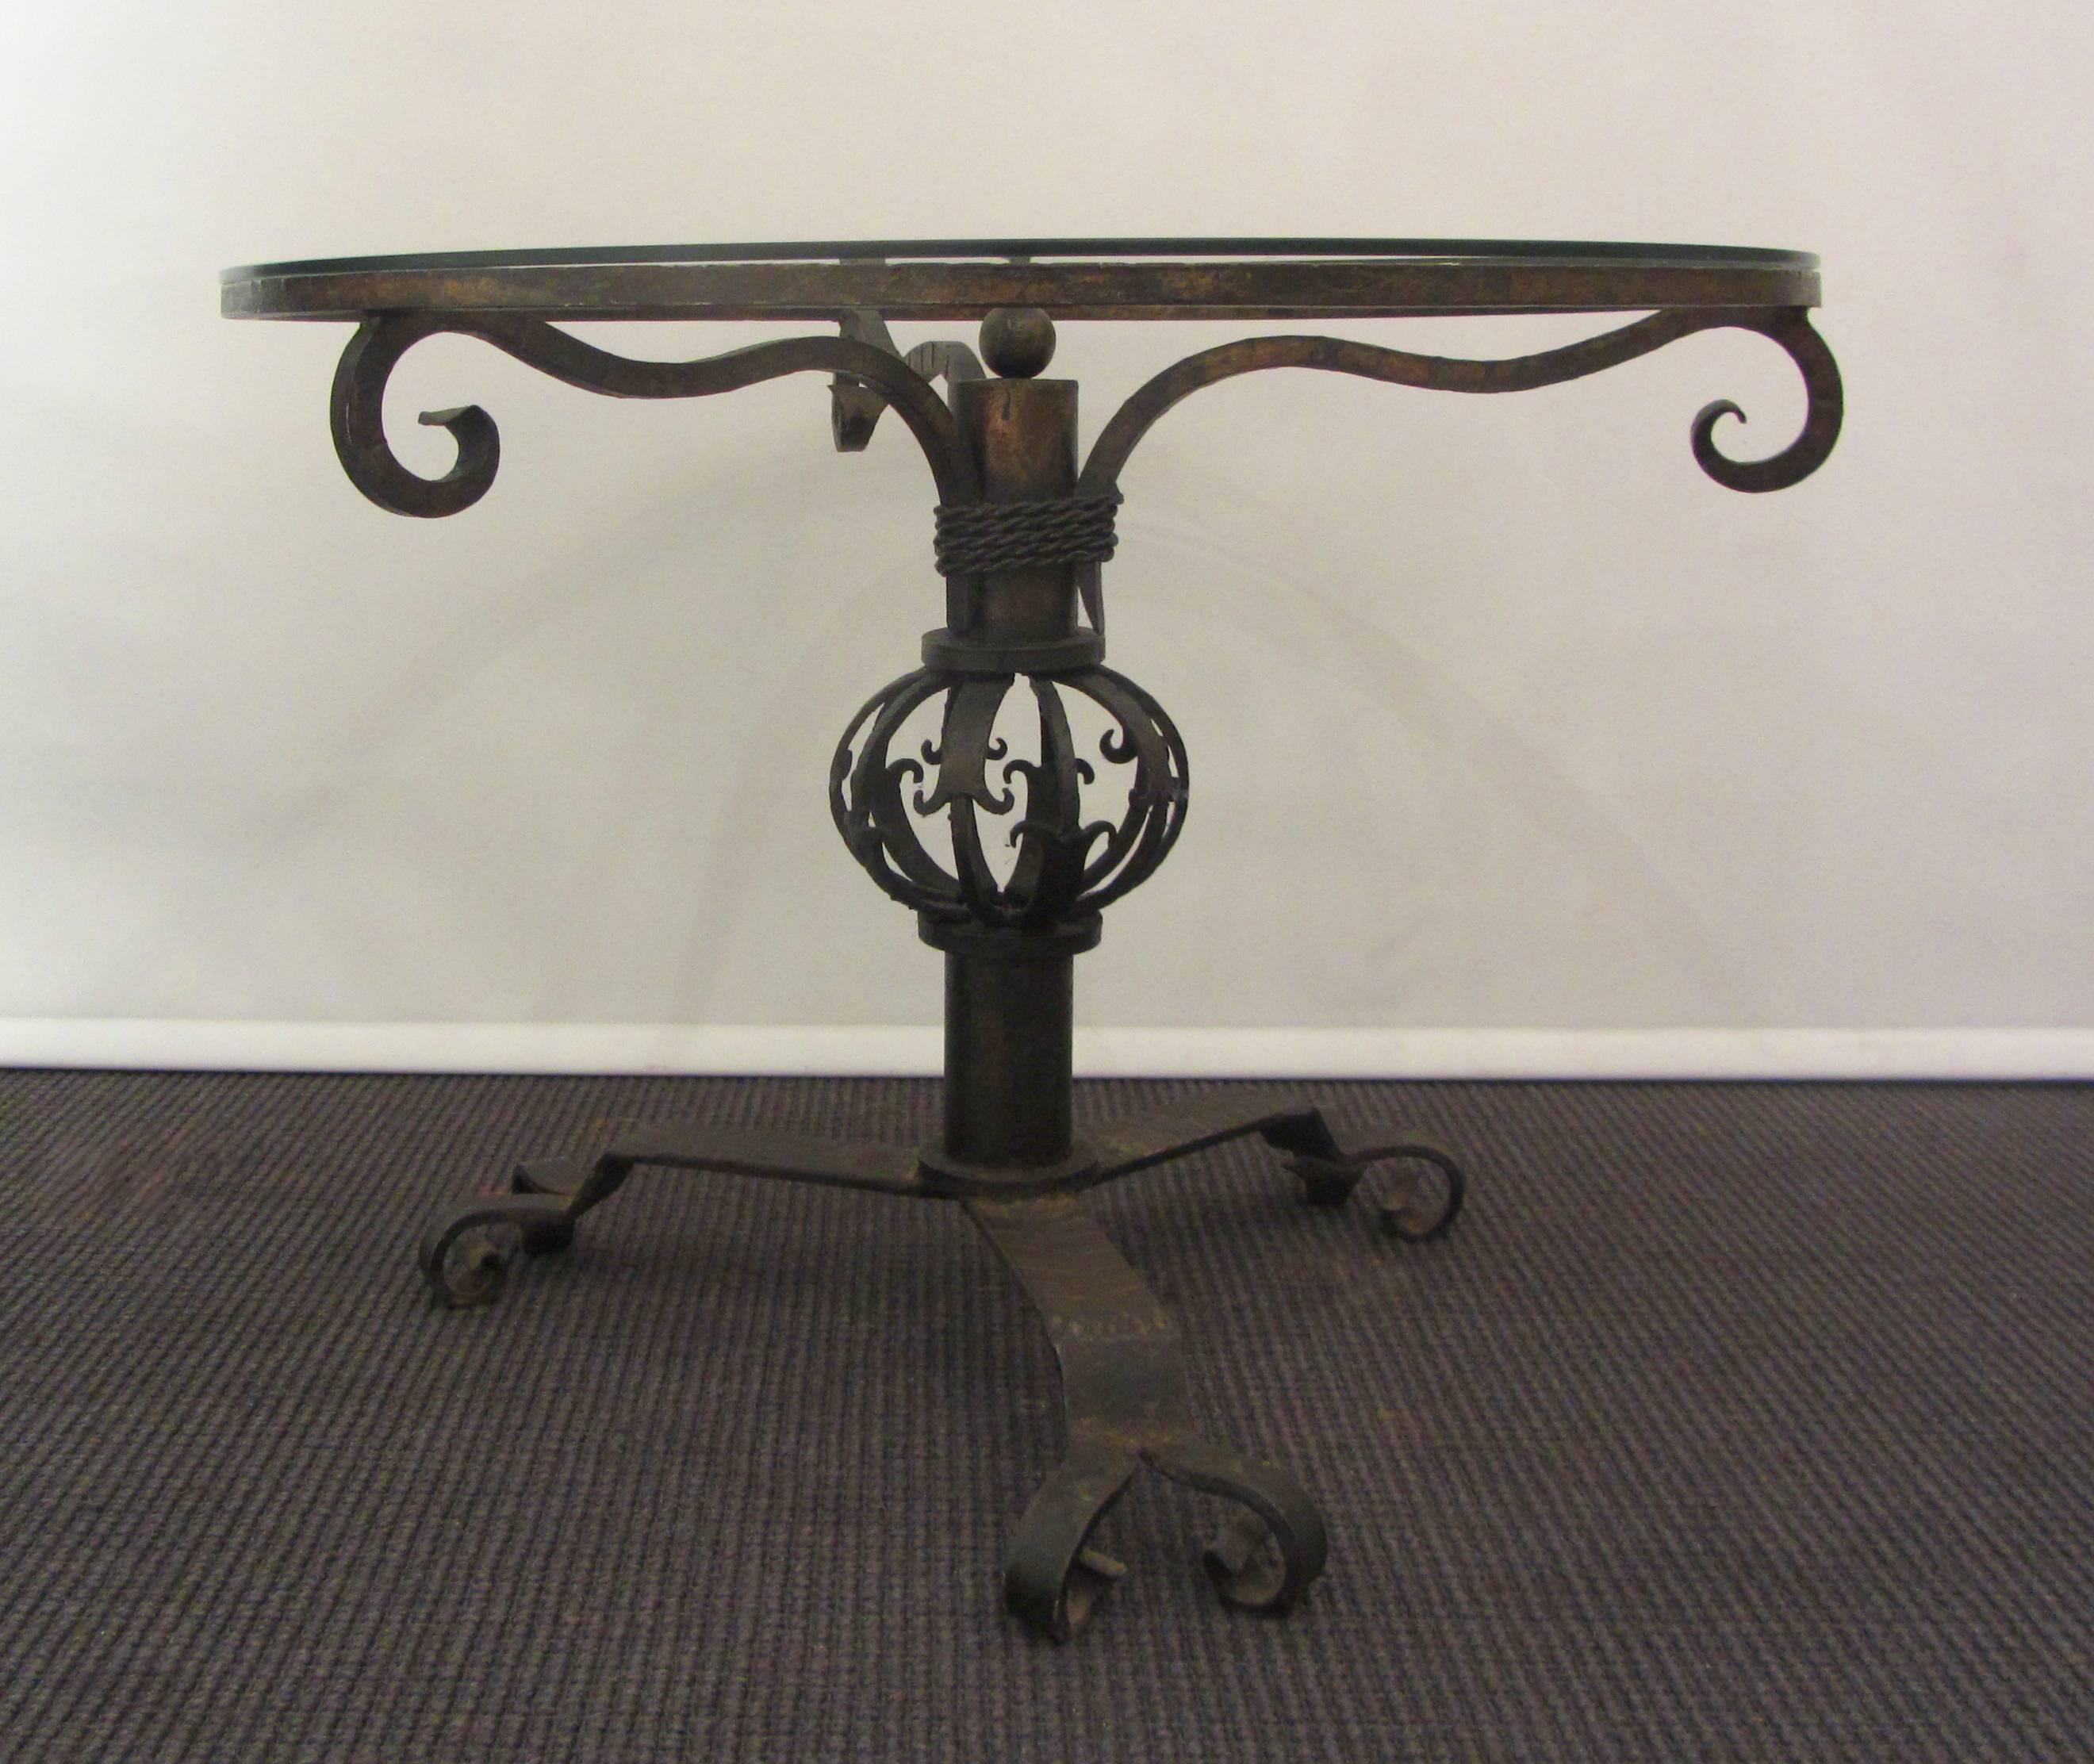 An unusual hand-forged wrought iron coffee table base with a circular glass top. The glass is 1/4 inch thick.